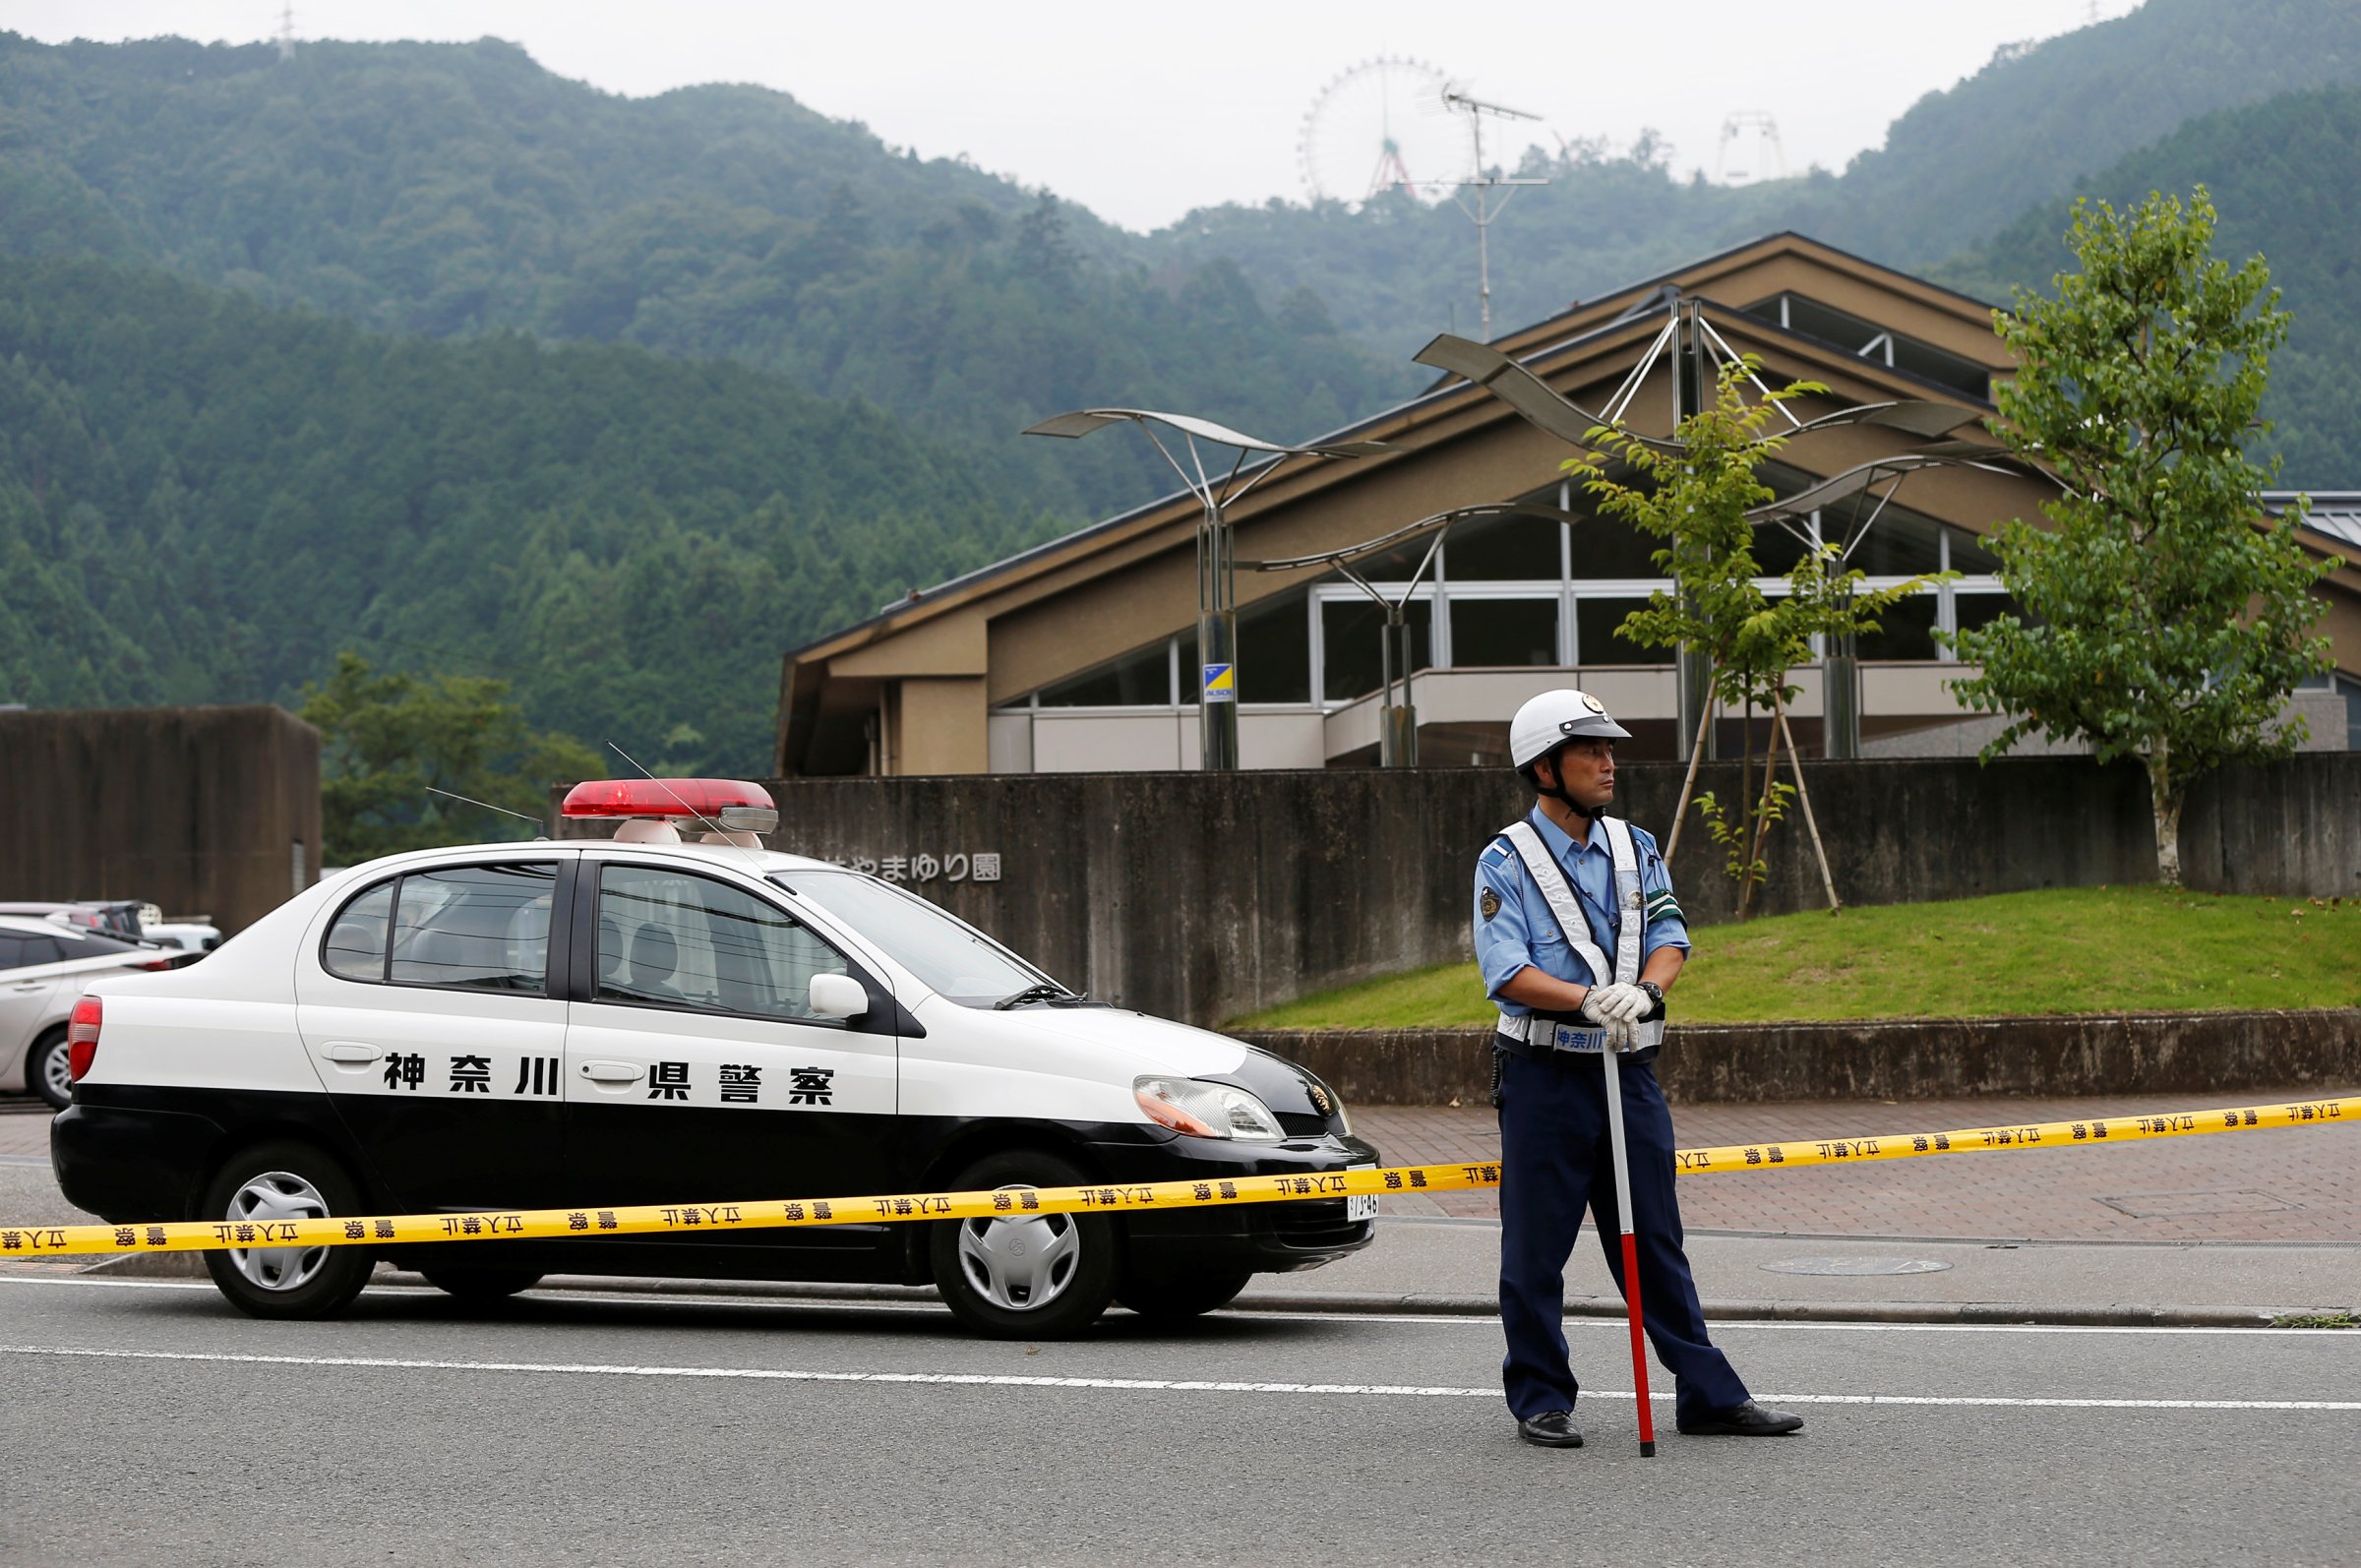 A police officer stands guard in front of a facility for the disabled, where a deadly attack by a knife-wielding man took place, in Sagamihara, Japan